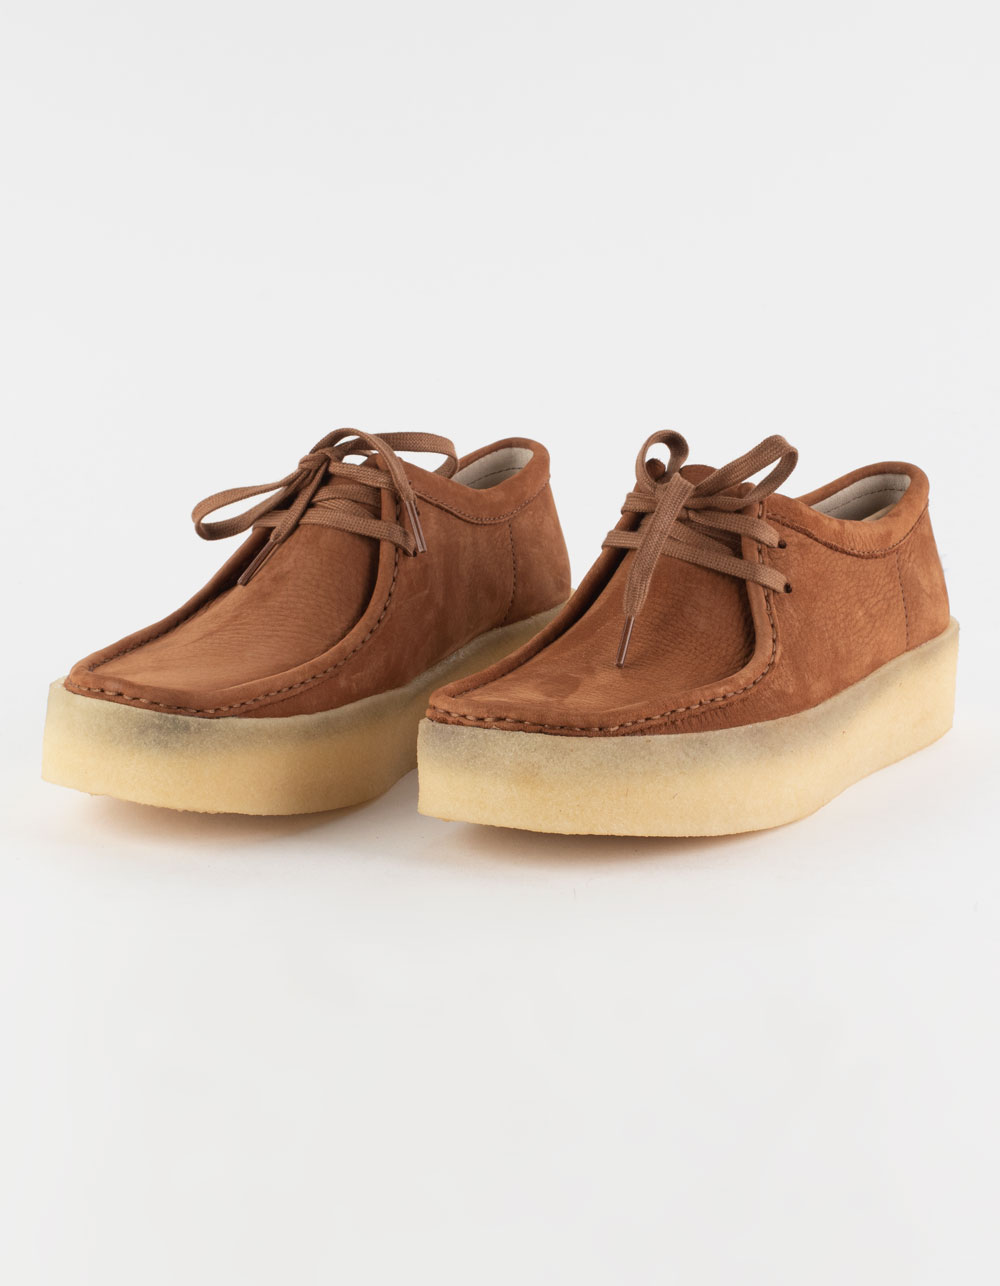 Where Can I Get Clarks Shoes? - Shoe Effect